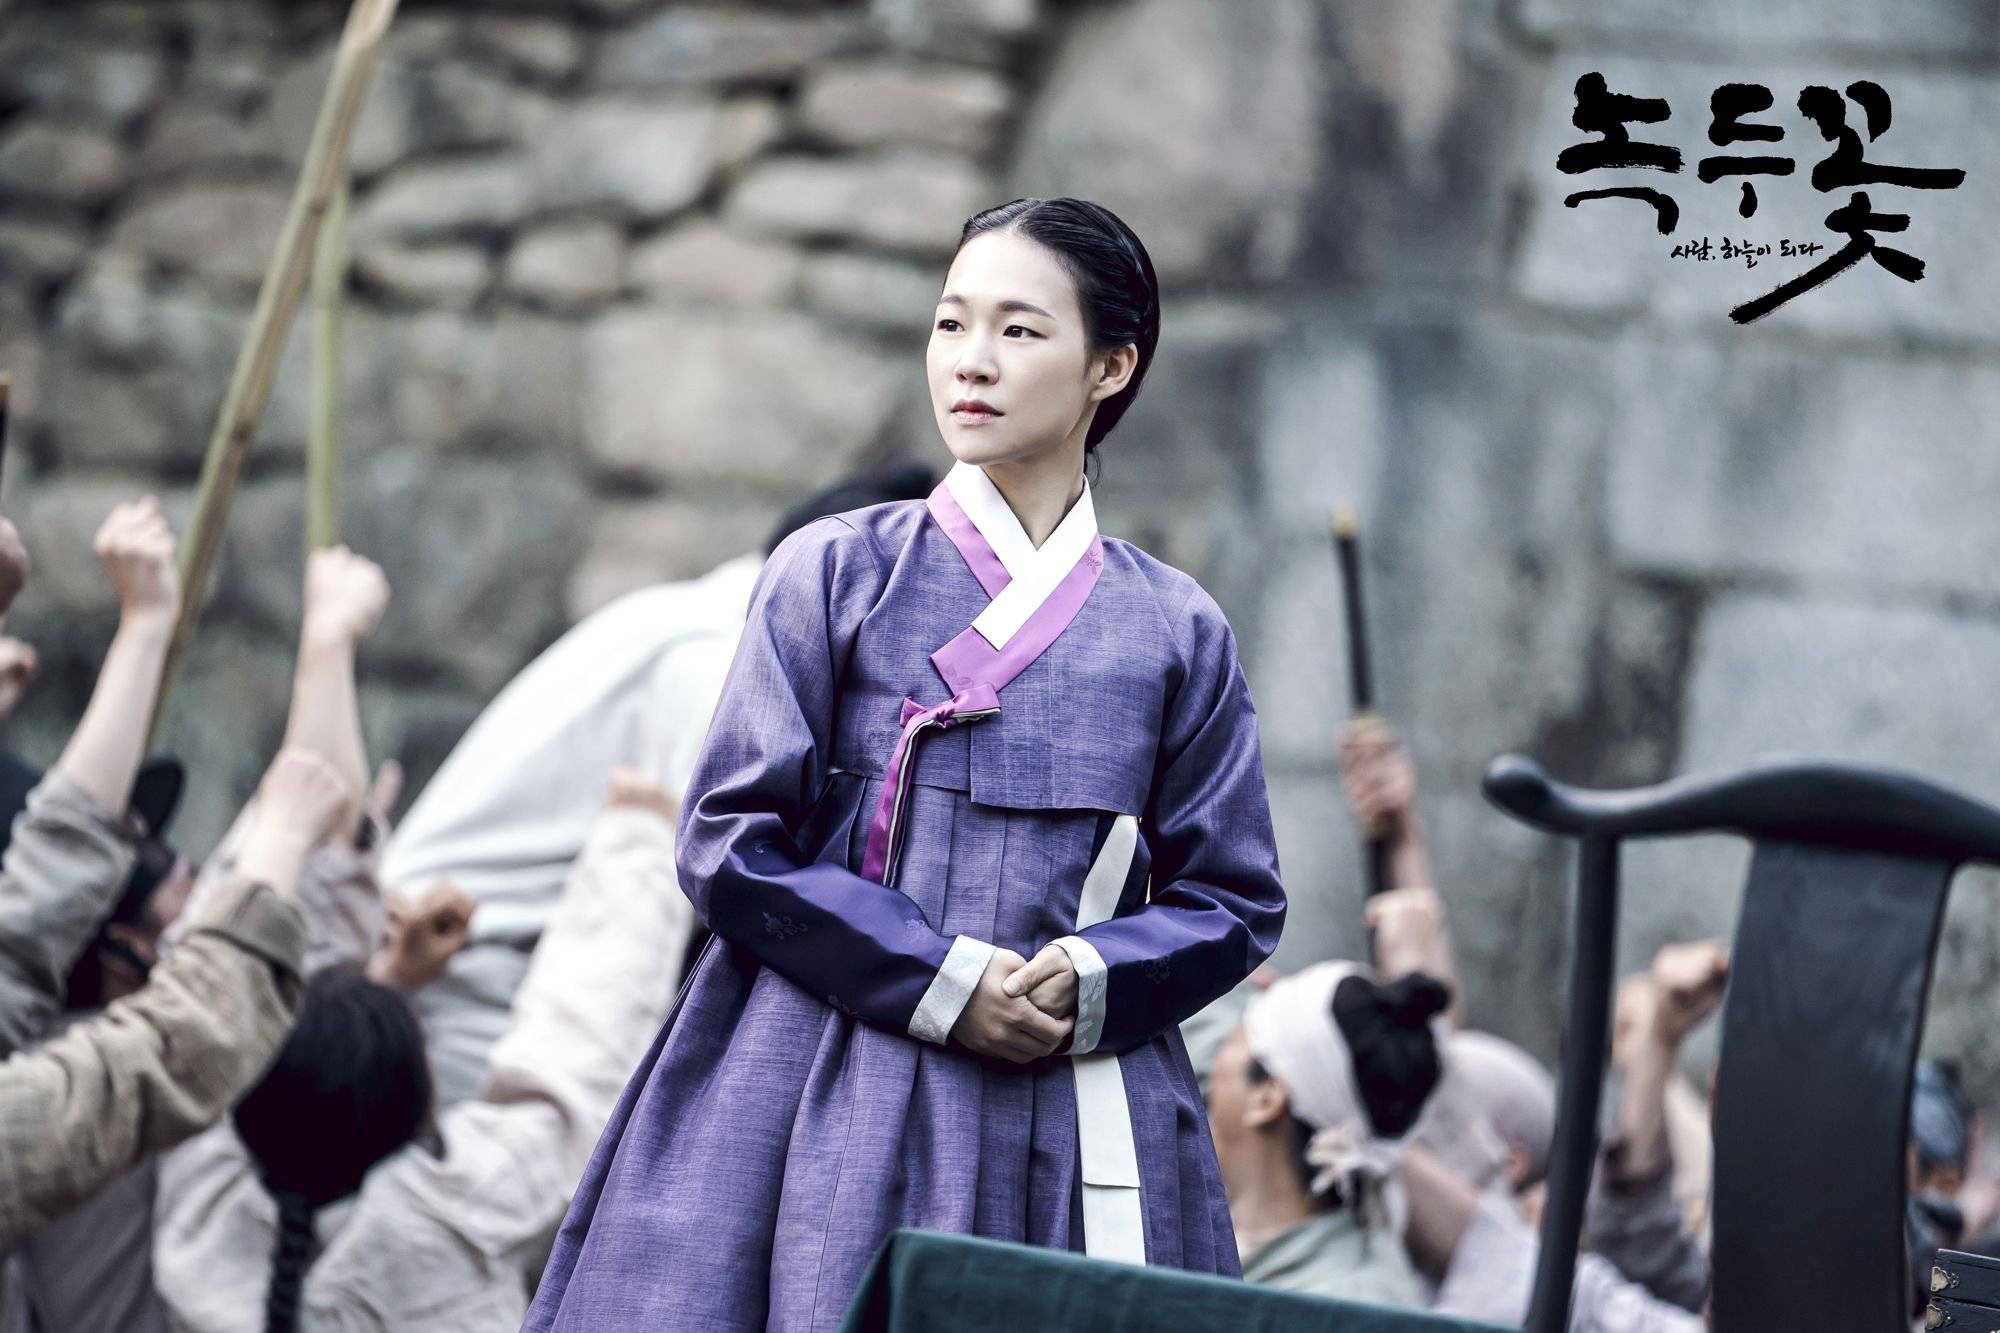 Photos New Stills And Behind The Scenes Images Added For The Korean Drama The Nokdu Flower Hancinema